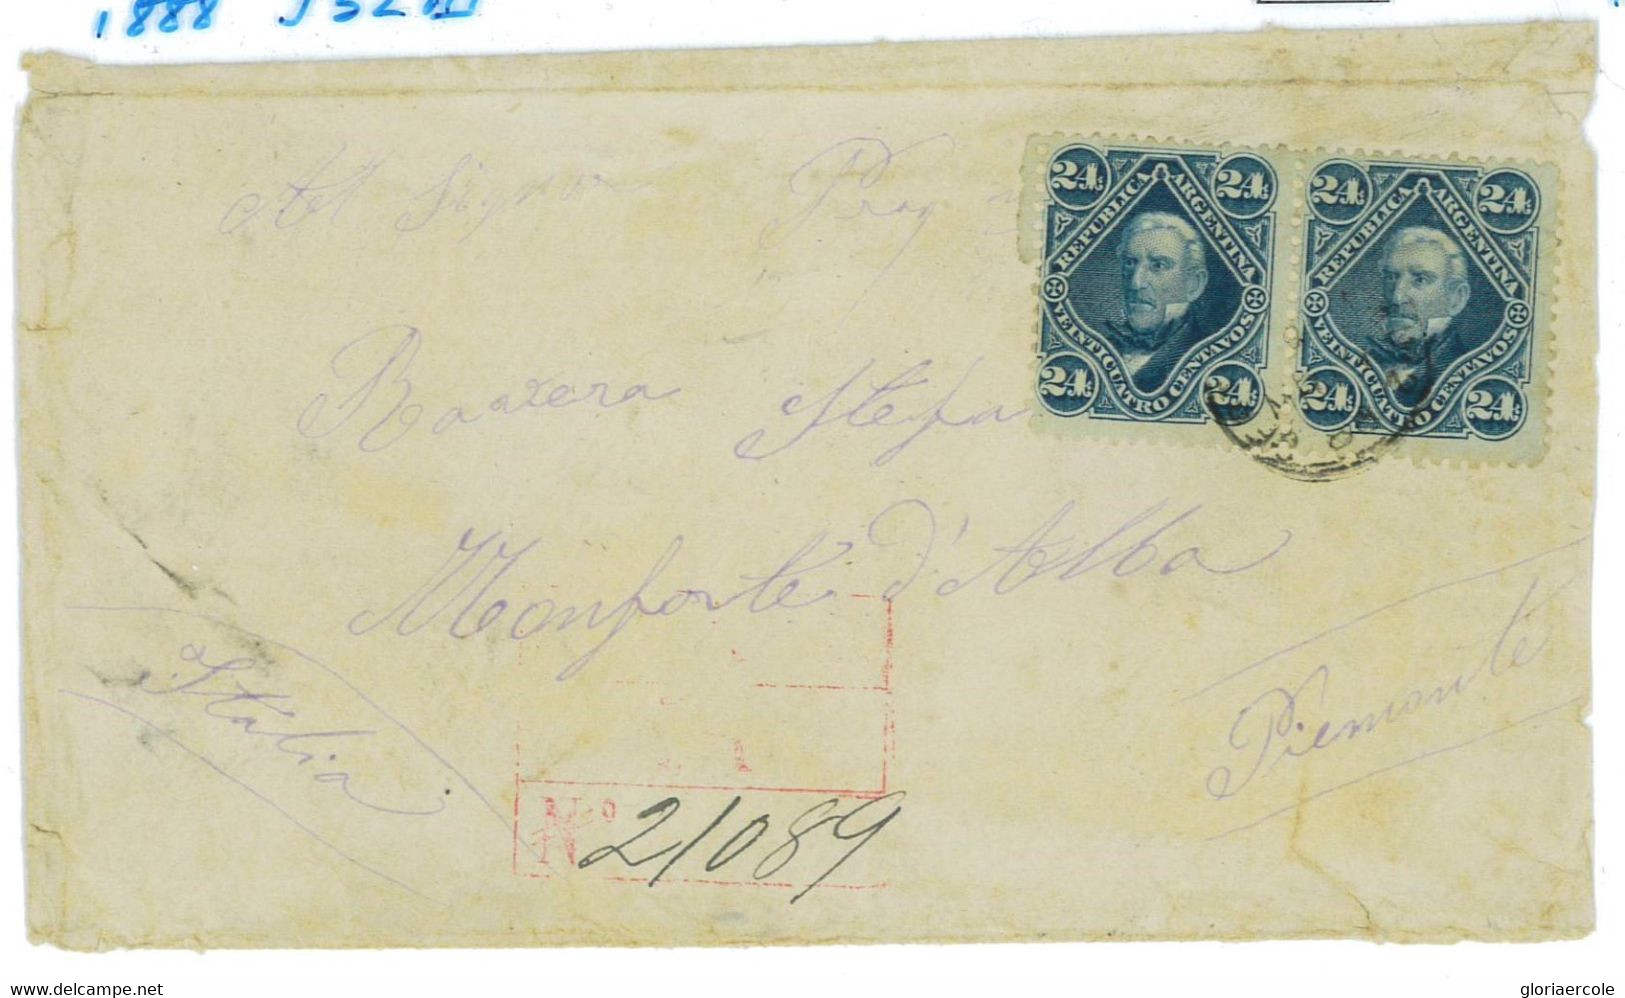 P0253 - ARGENTINA - POSTAL HISTORY - Jalil # 52 Pair - REGISTERED COVER  To ITALY  1888 - Covers & Documents